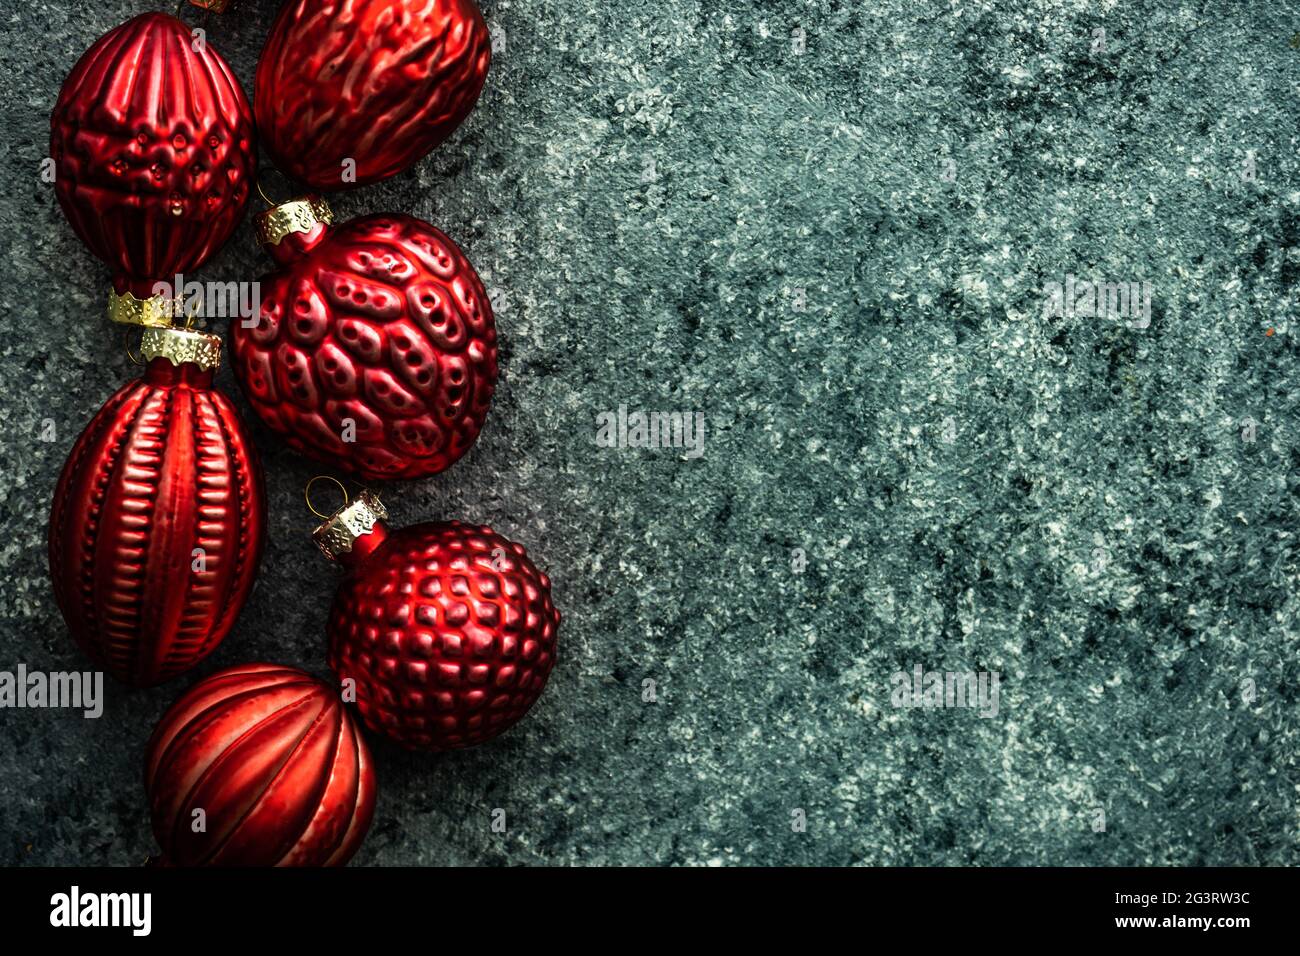 Christmas flat lay with ornament Stock Photo